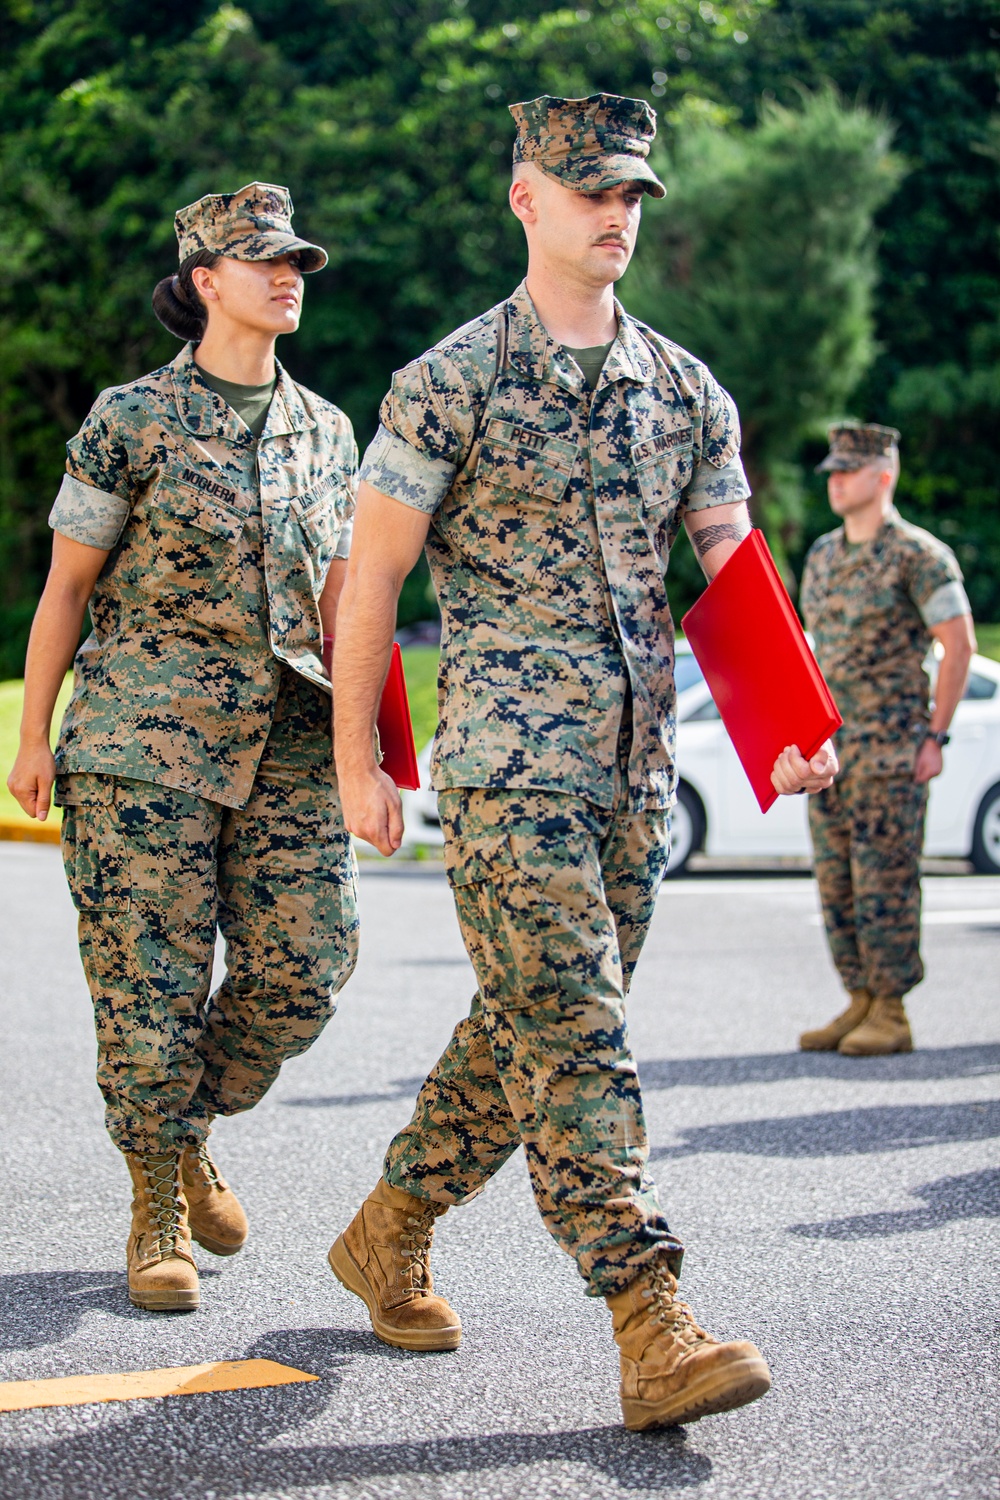 2023 Commandant’s Retention Program works to retain talented first-term Marines